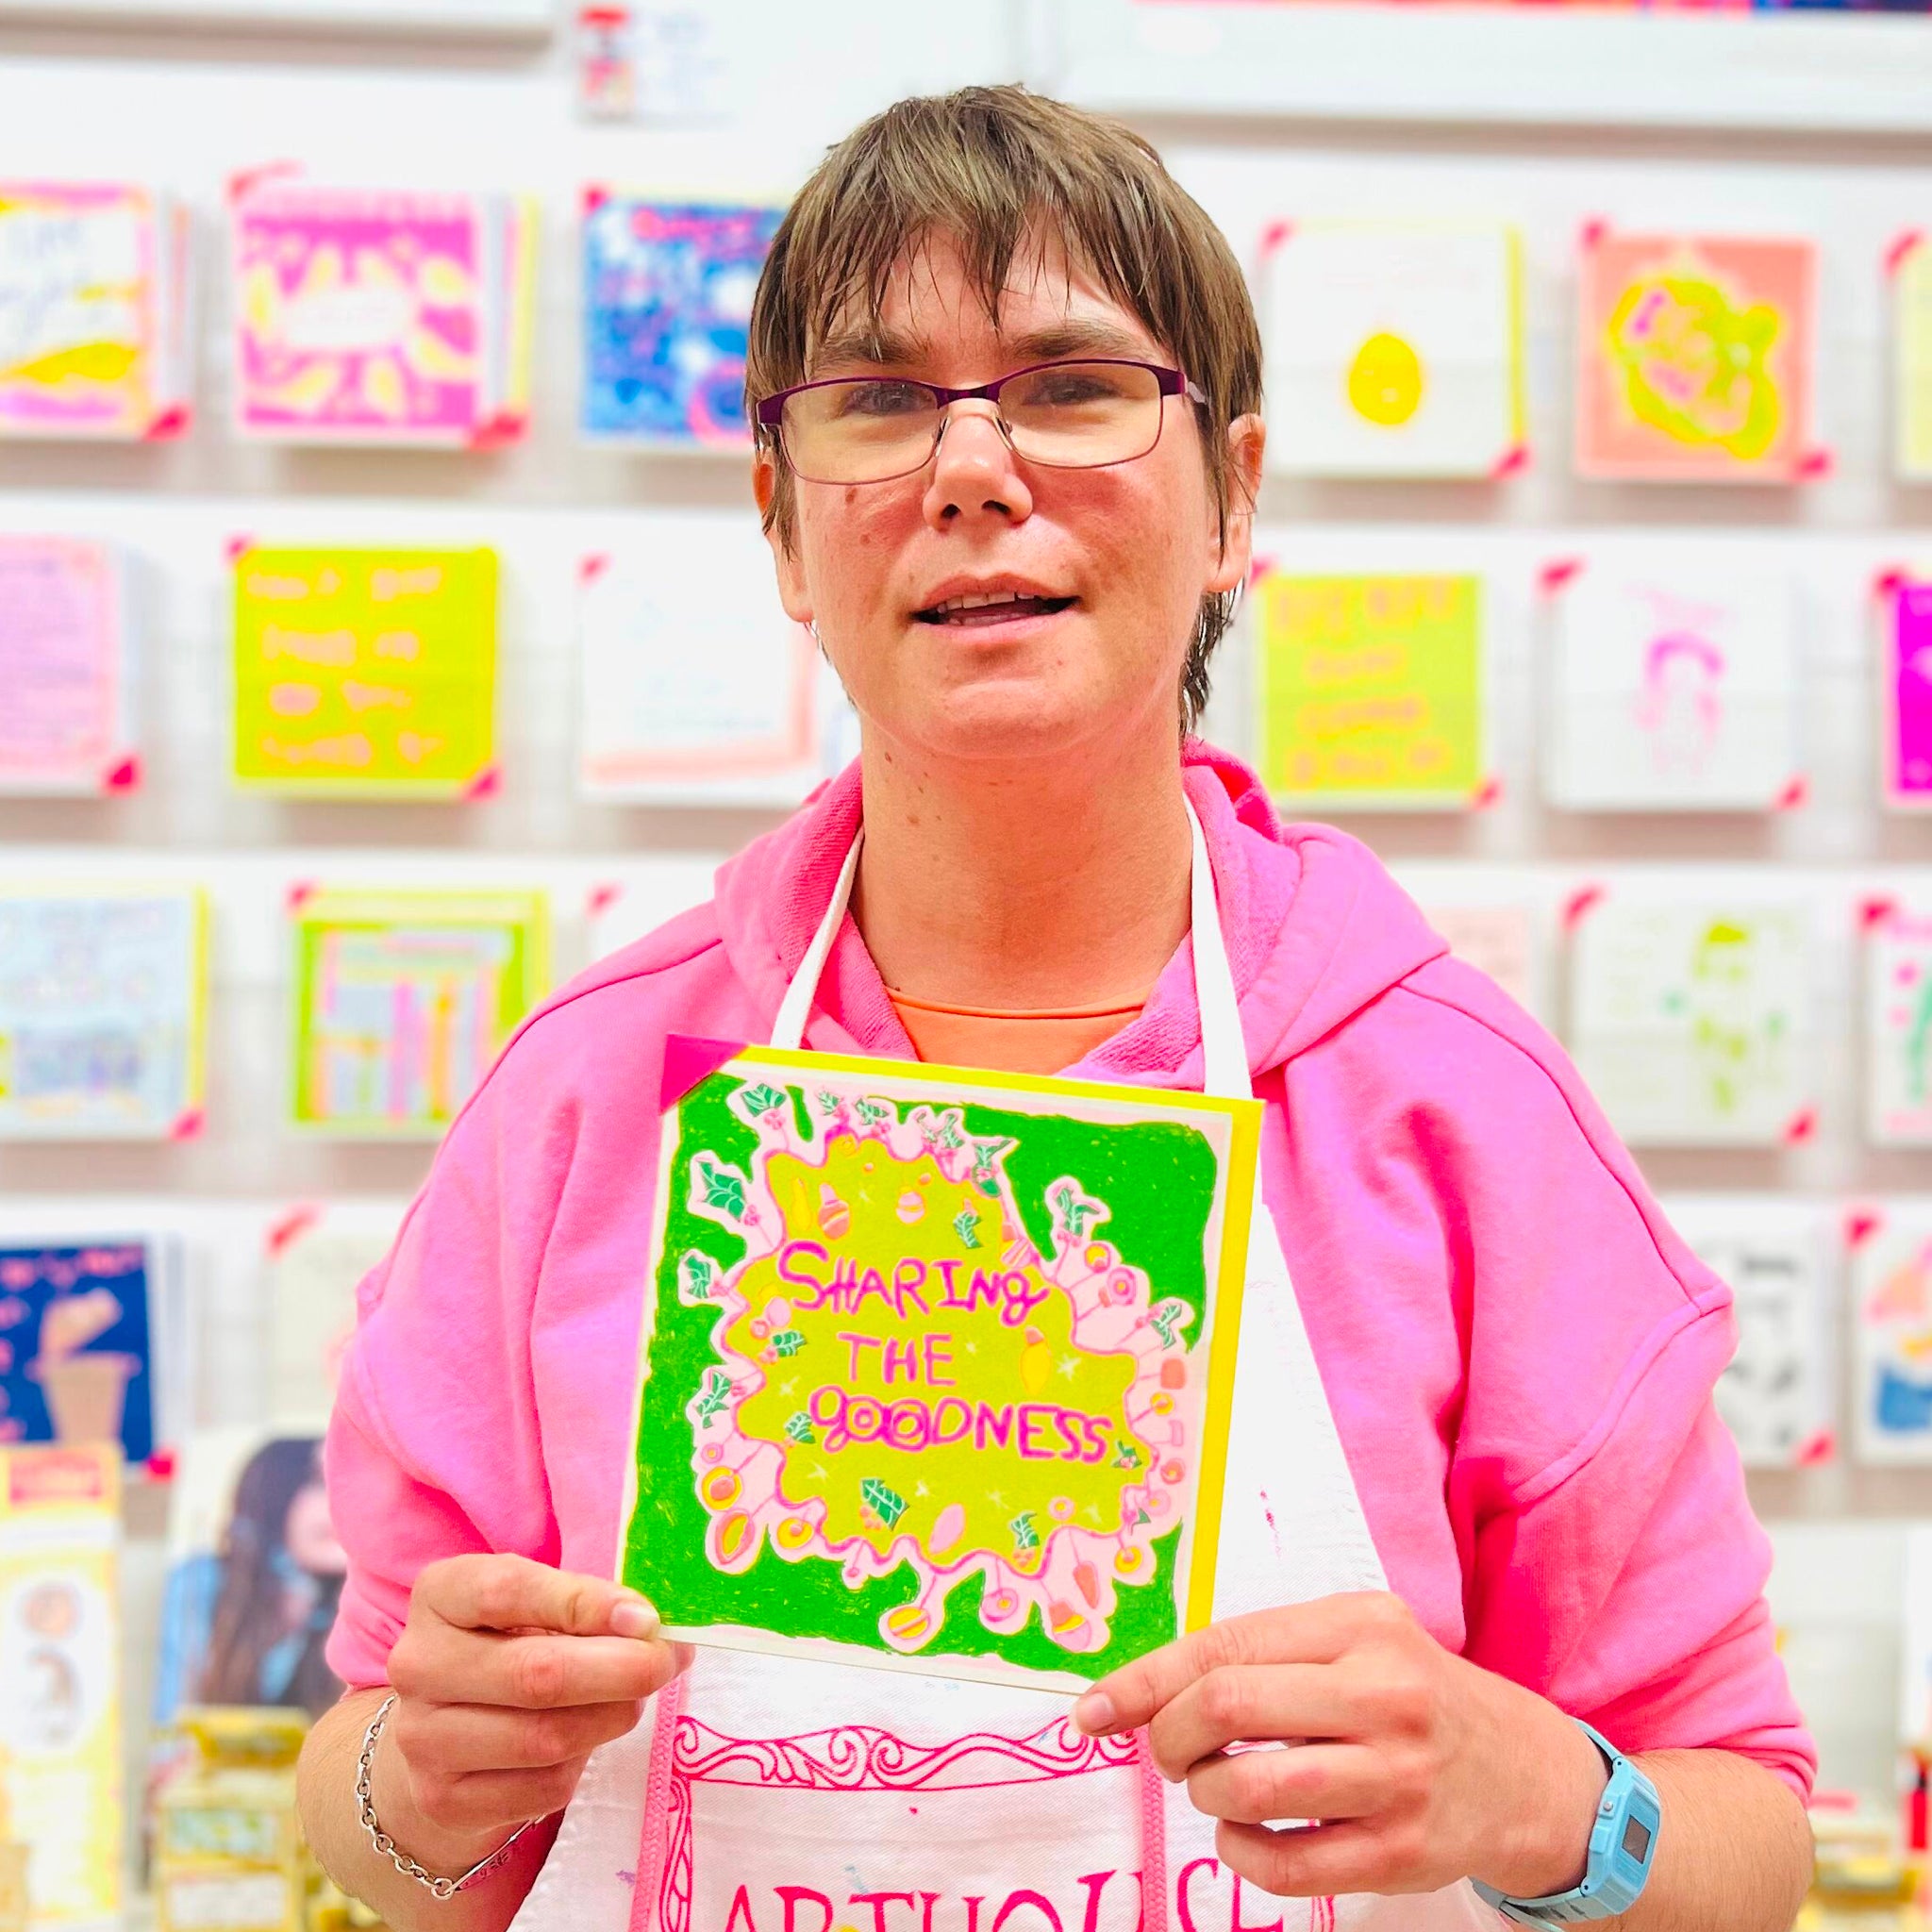 A female artist holding A hand drawn pink and green card with the words sharing the goodness